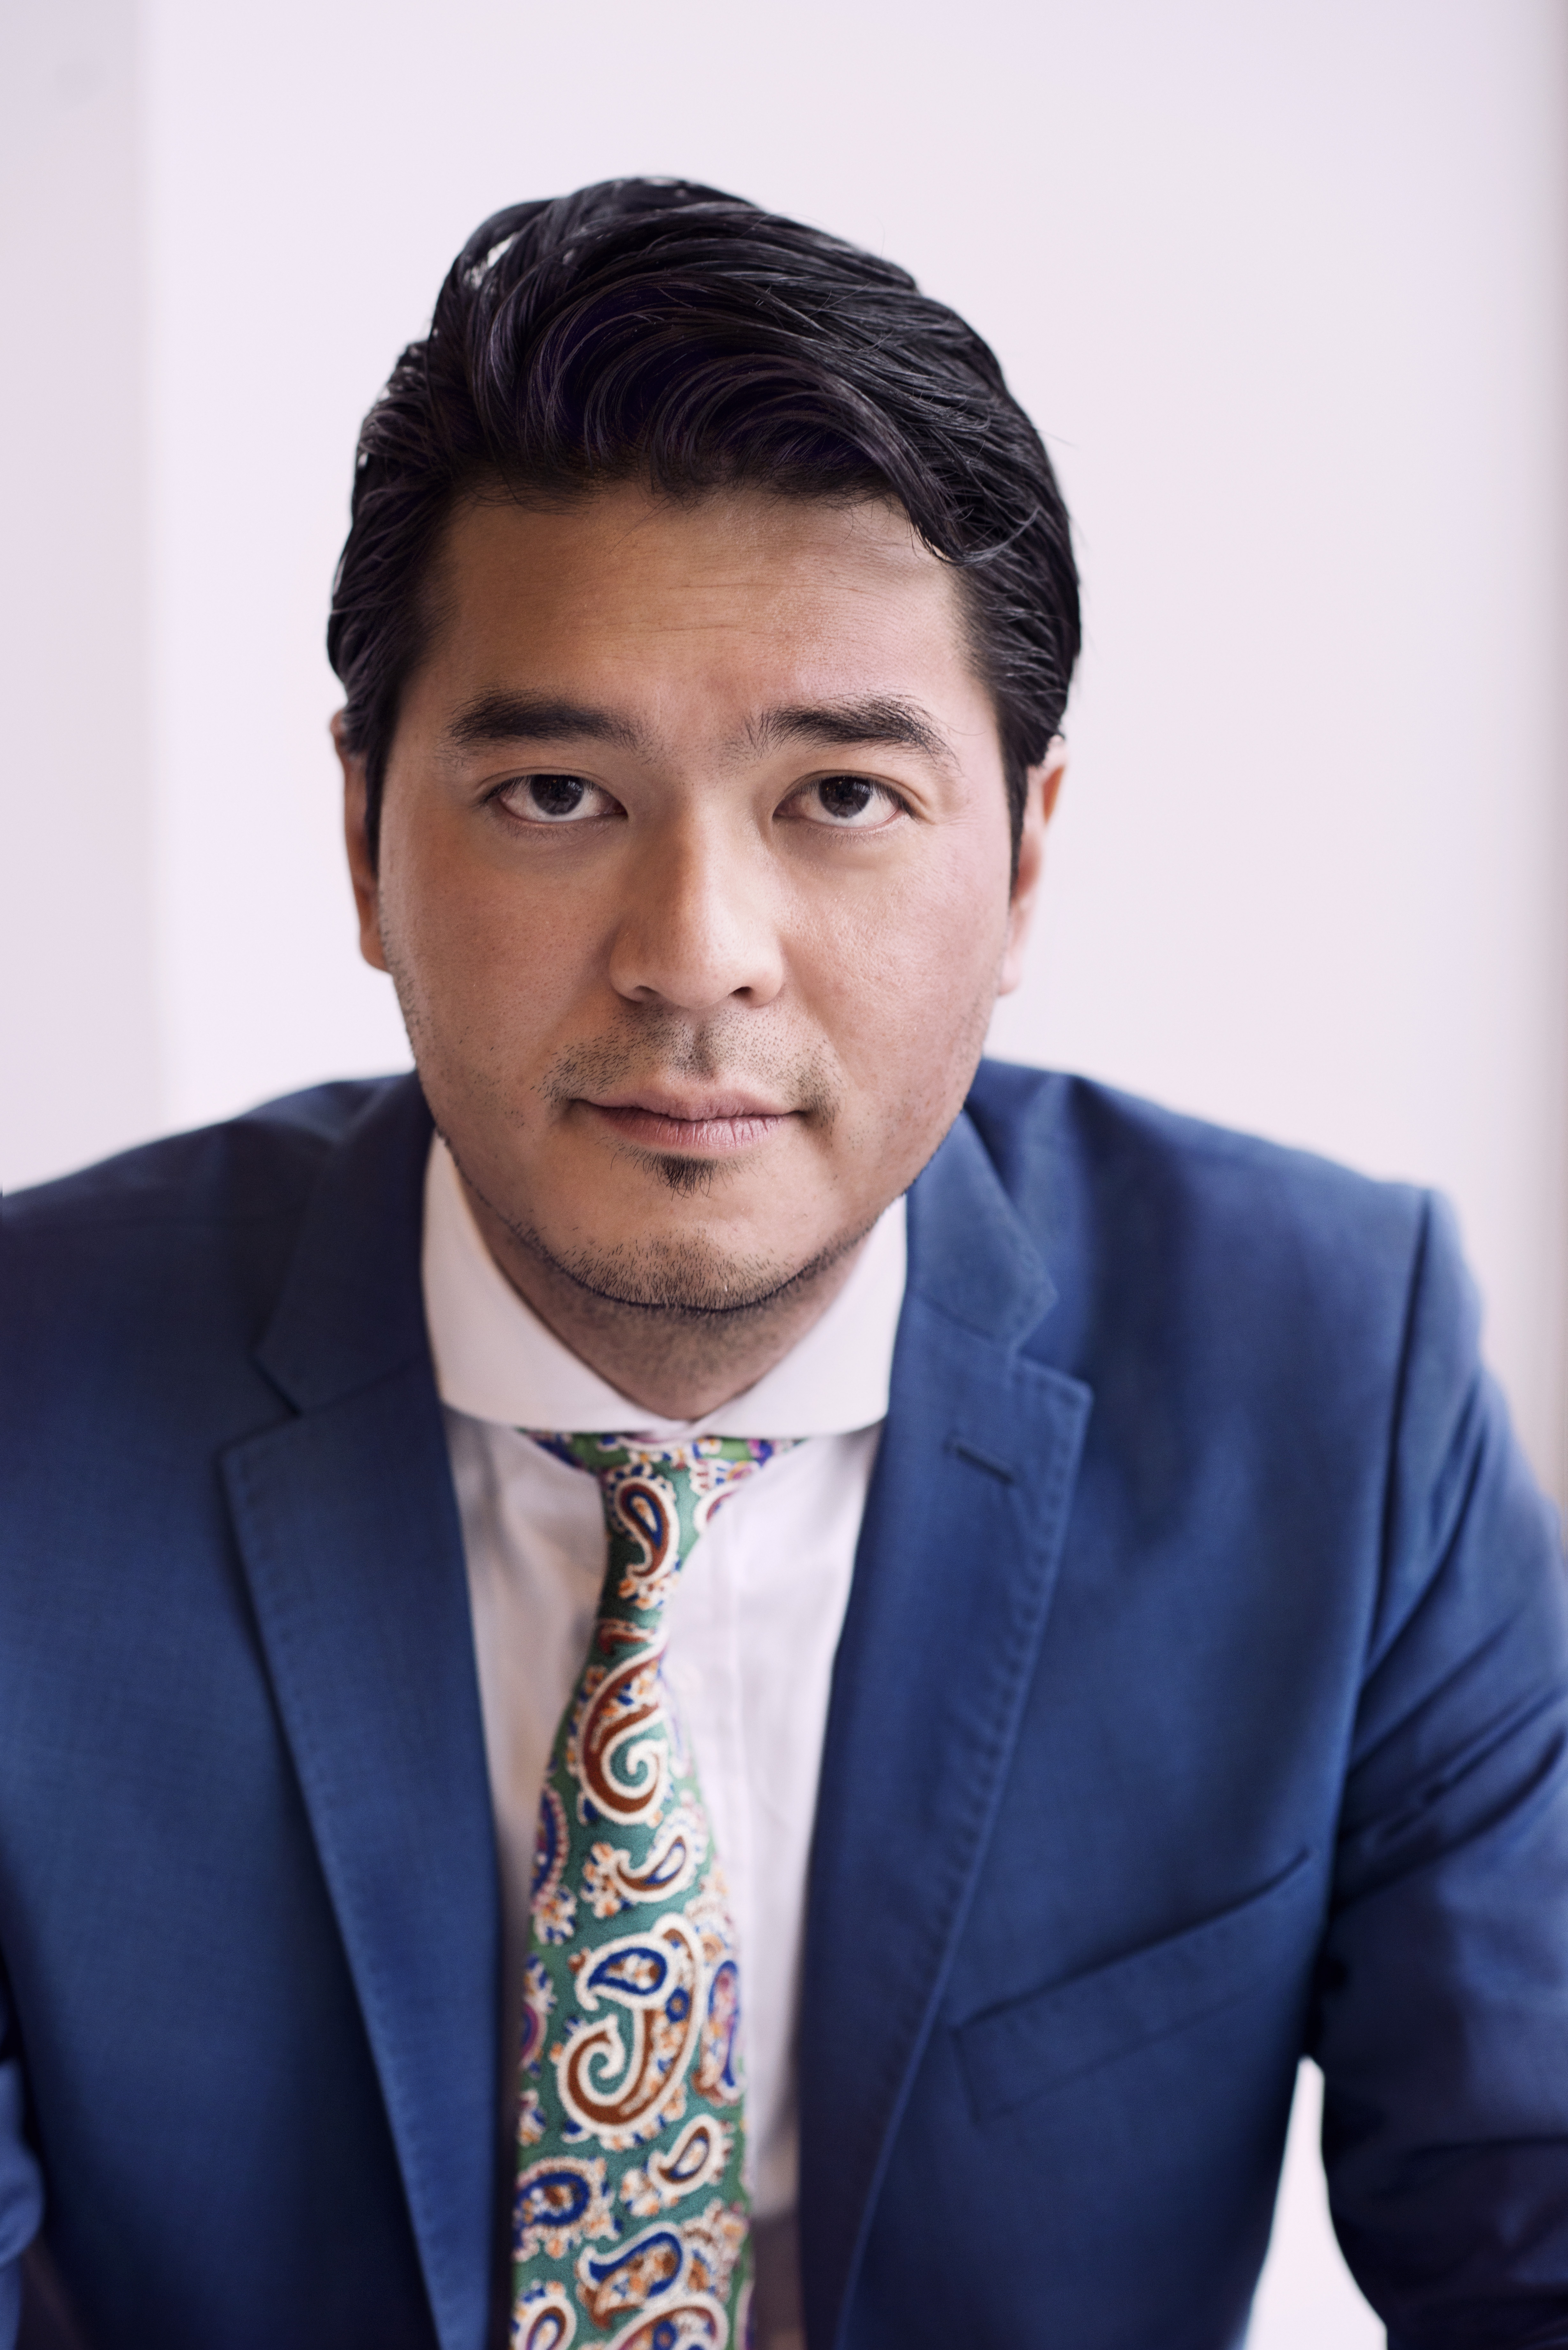 Andy Chen, who will be a panelist on Oct 2 from 16:00-17:30 in Joseph Haydn-Hall, is the CEO of Aspiro Group, a media technology company publically listed ... - andy_chen_aspiro_wimp_ceo